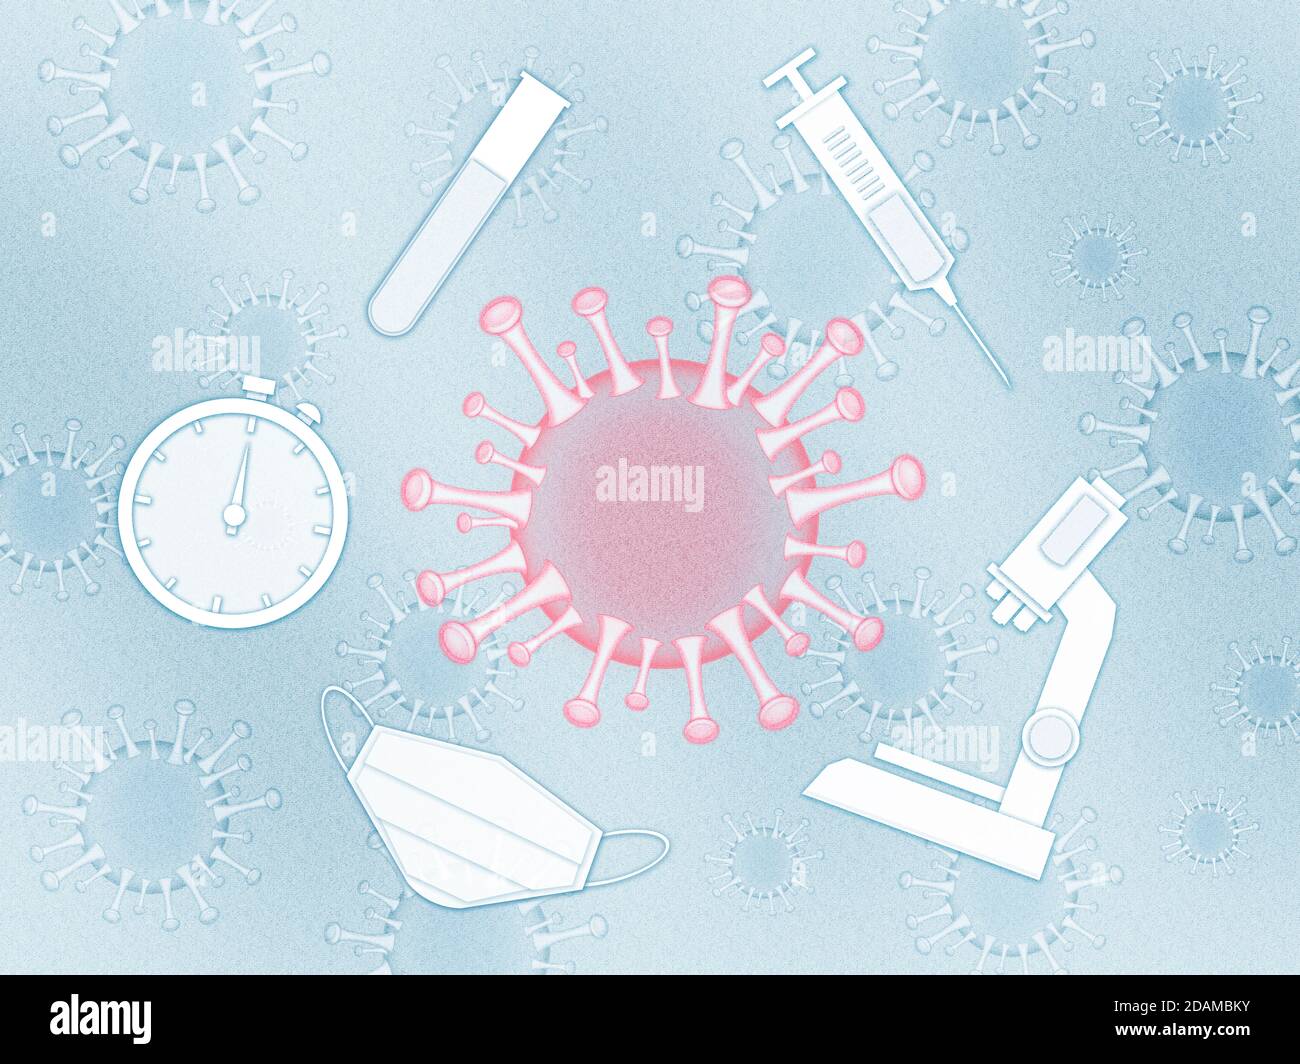 Covid-19 virus surrounded by research symbols, illustration. Stock Photo